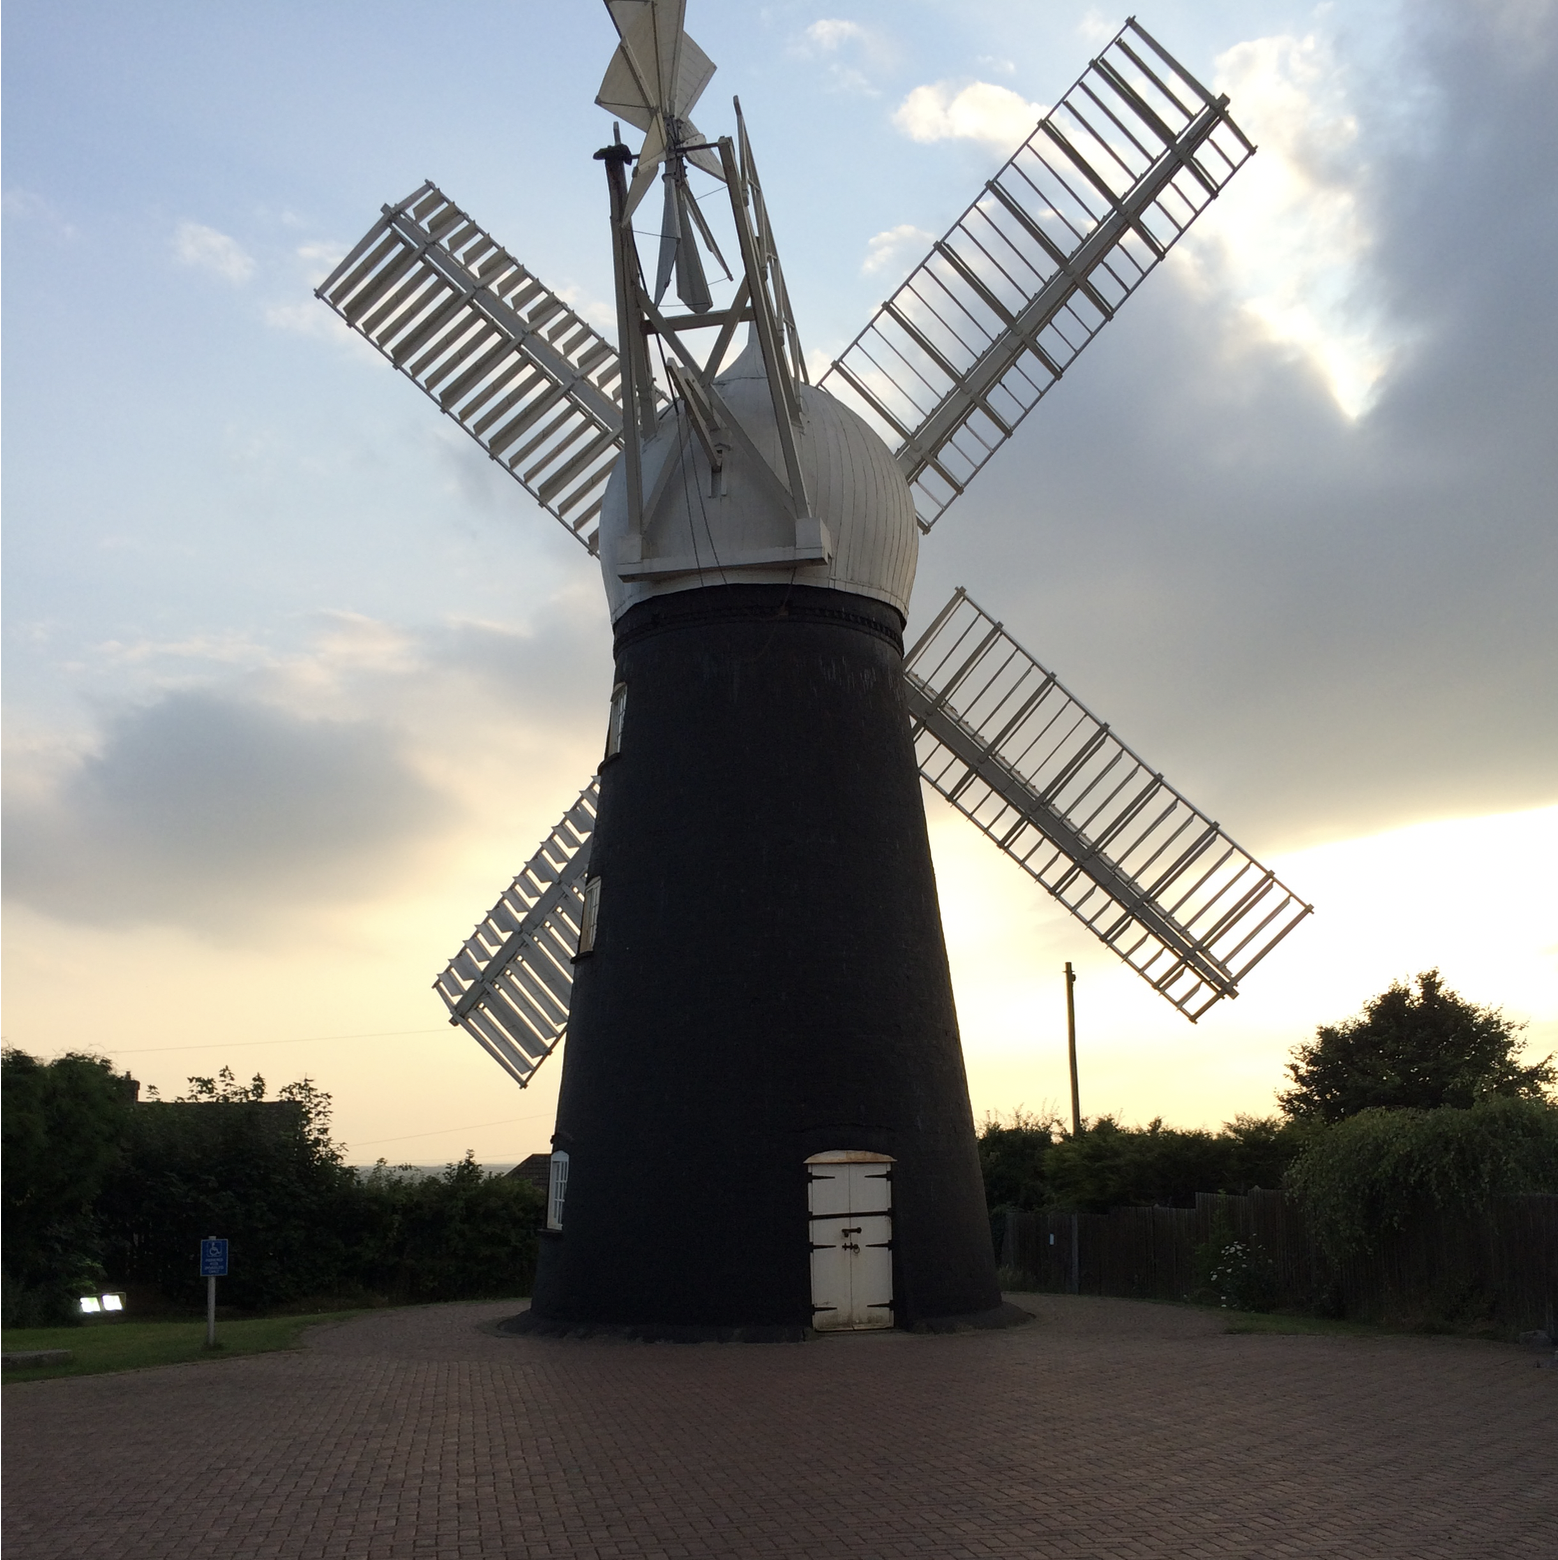 Burton Road and Bailgate walking tour by LincsConnect. Ellis Mill Windmill